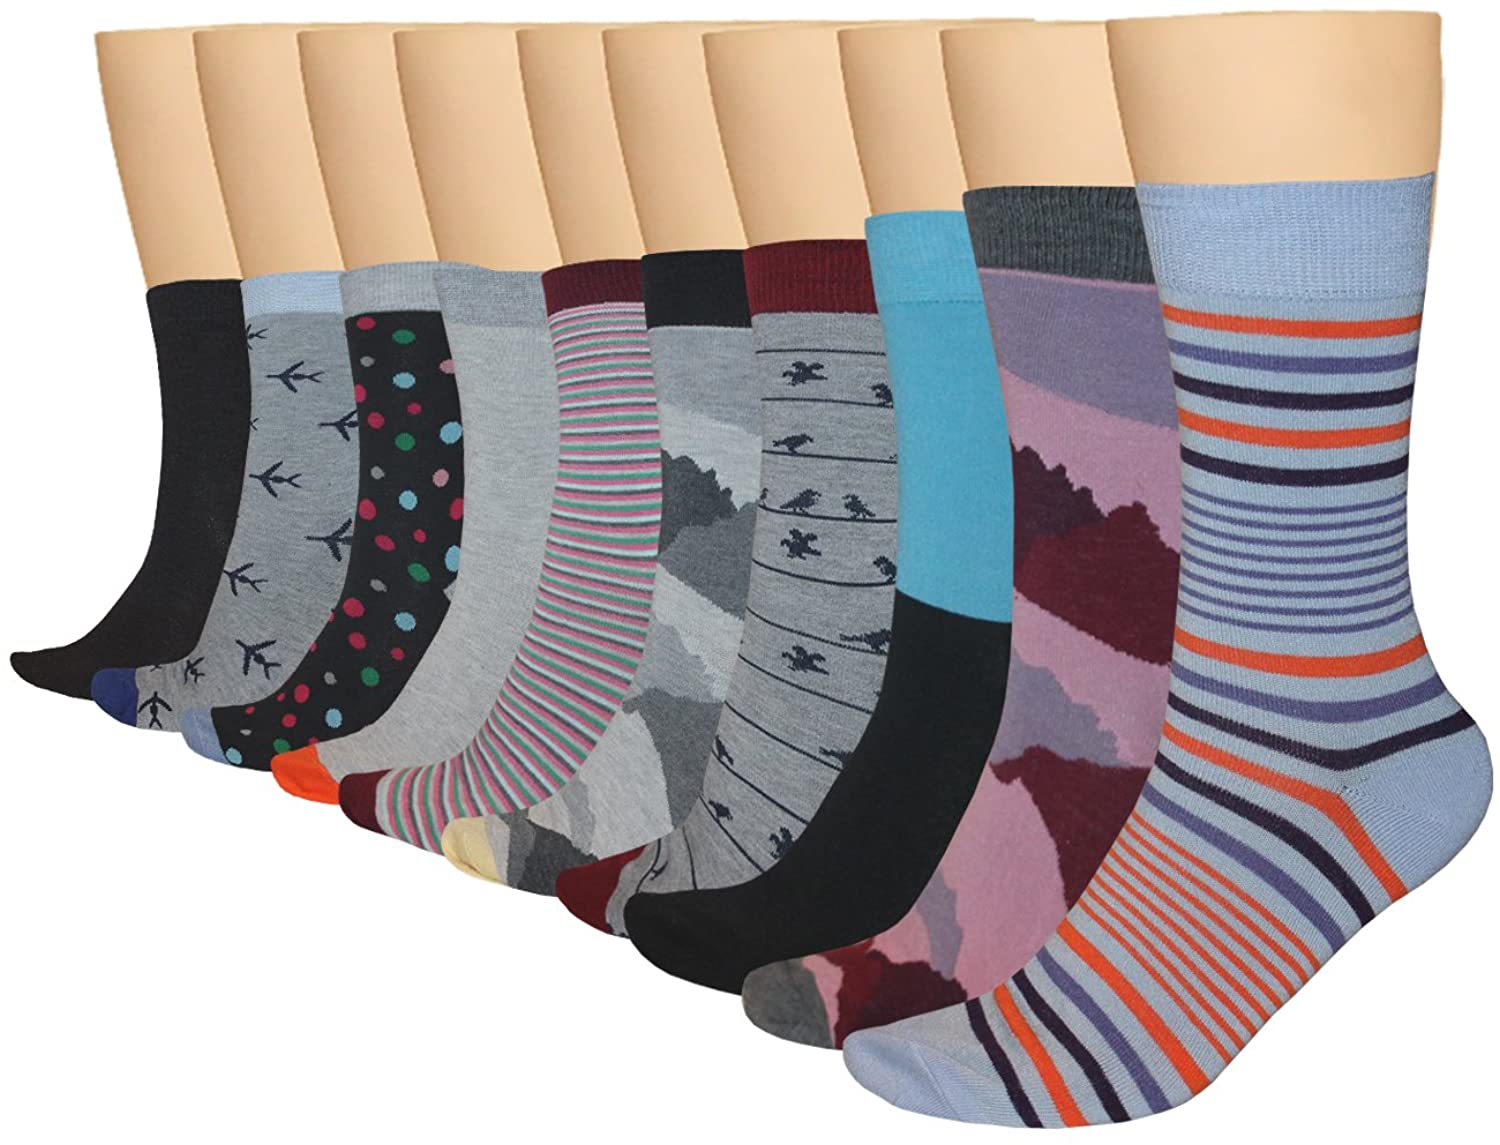 3KB Mens Dress Socks Variety of Patterns and Sizes 10 Pairs Per Pack 